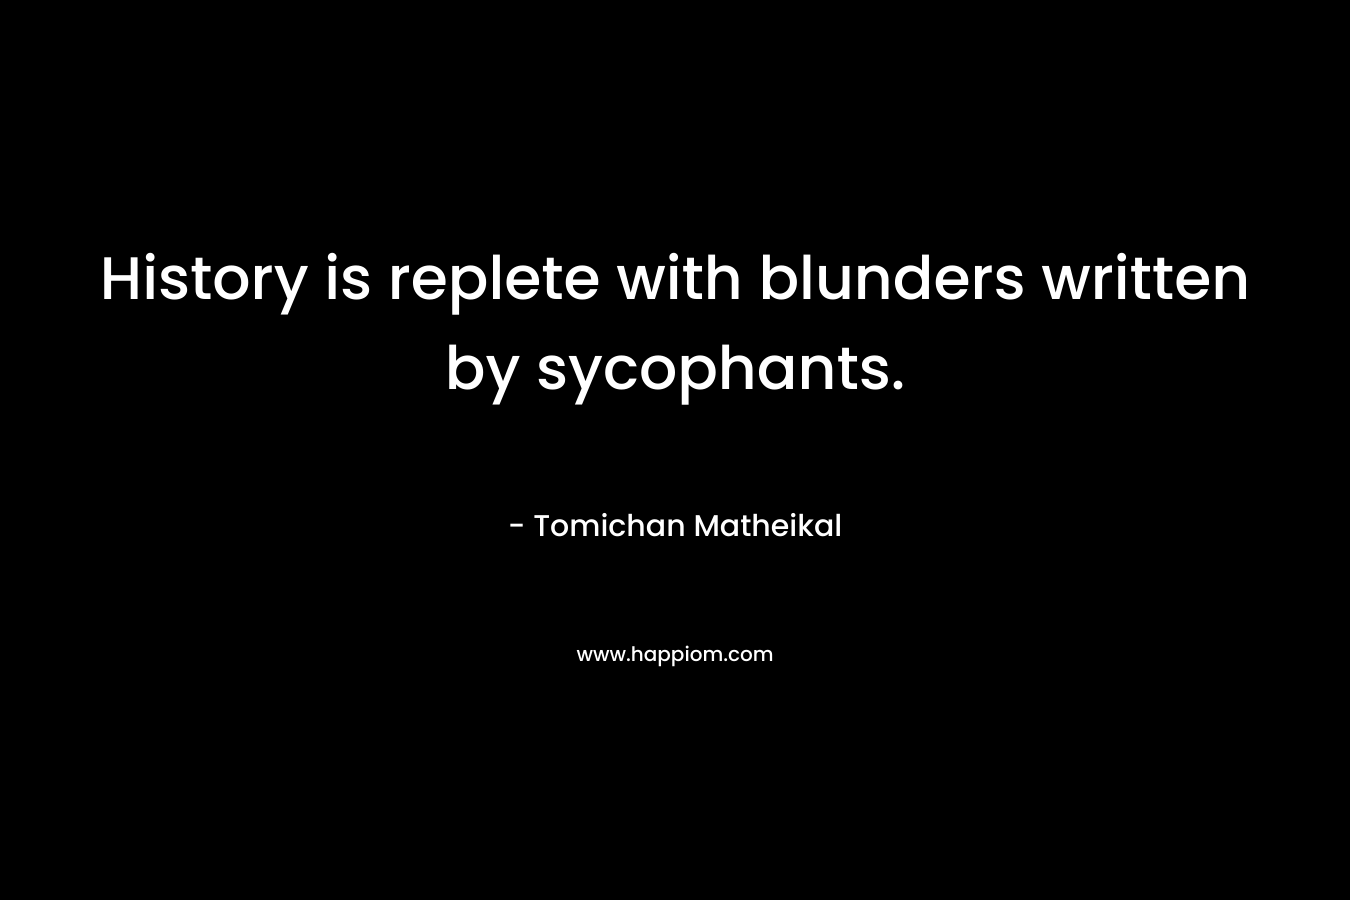 History is replete with blunders written by sycophants. – Tomichan Matheikal